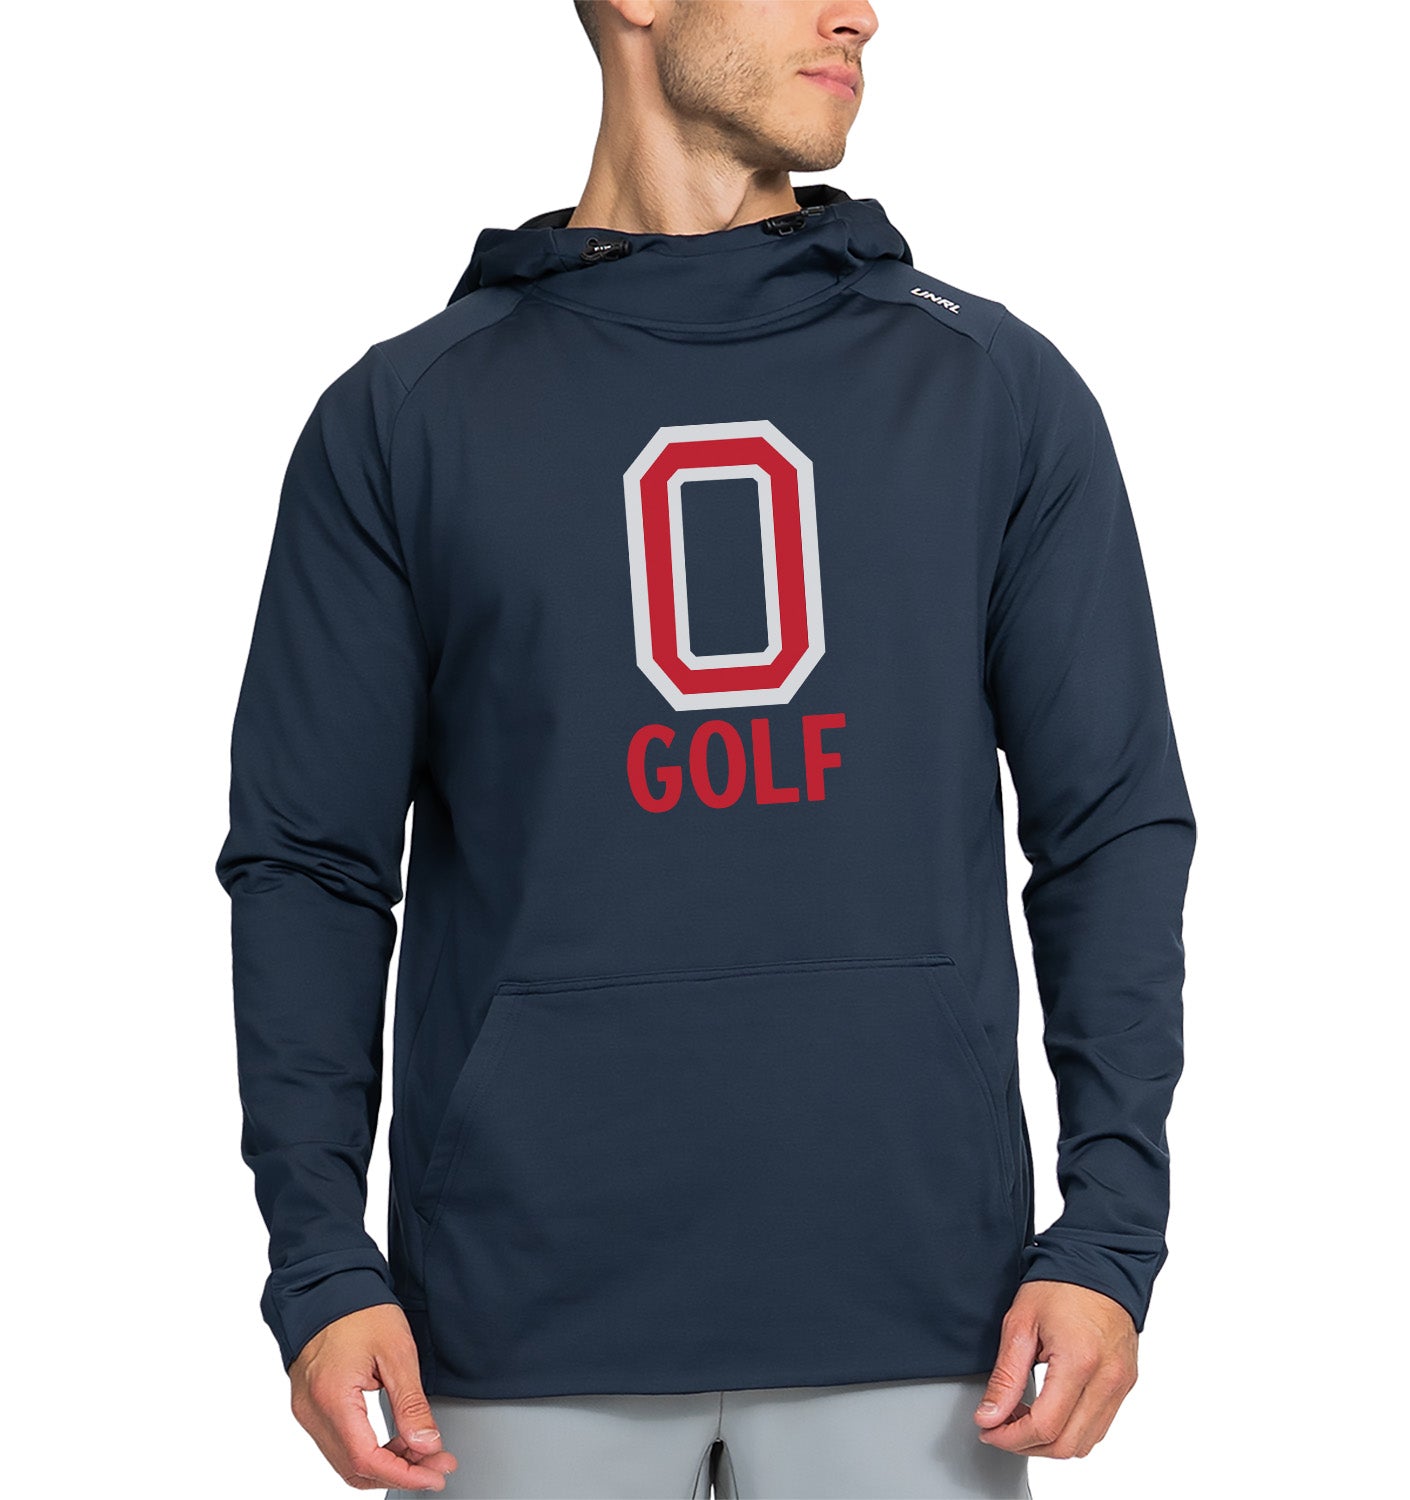 Orono Golf // UNRL - Adult Crossover Hoodie